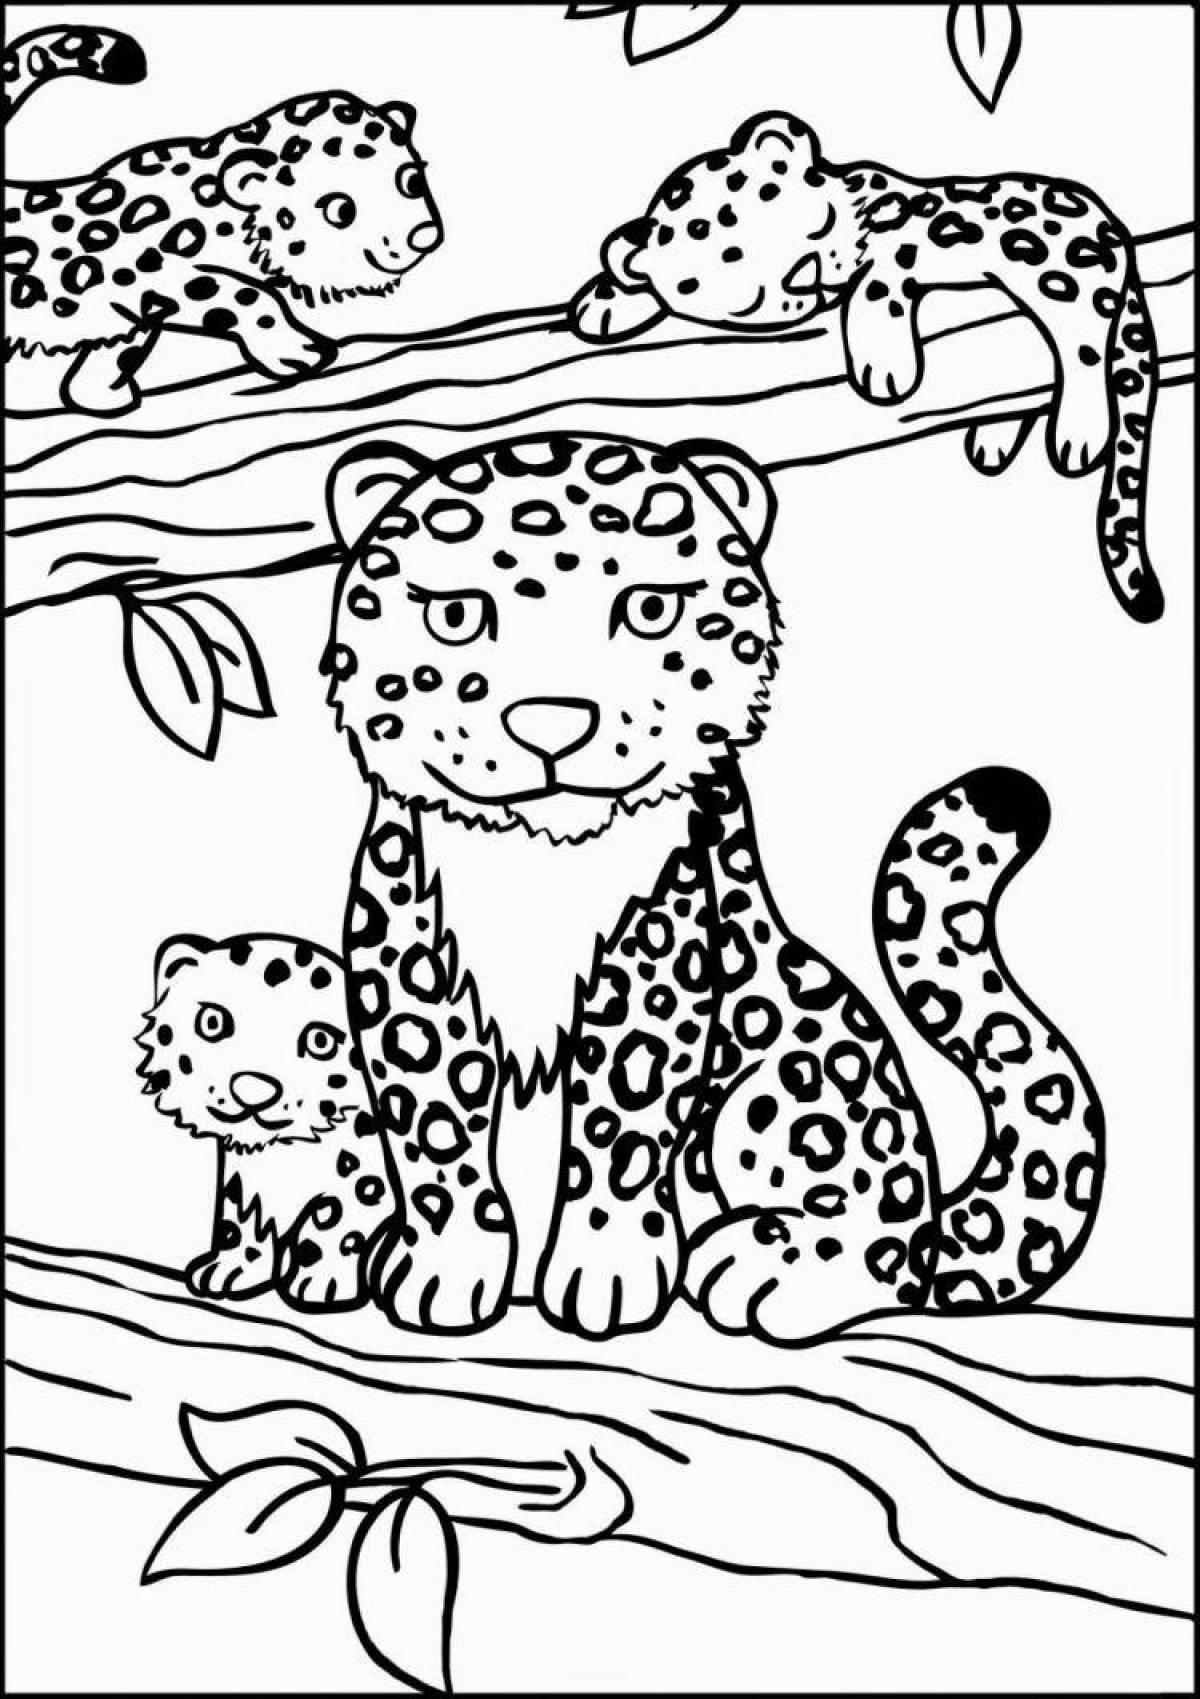 Colouring beckoning leopard for children 5-6 years old